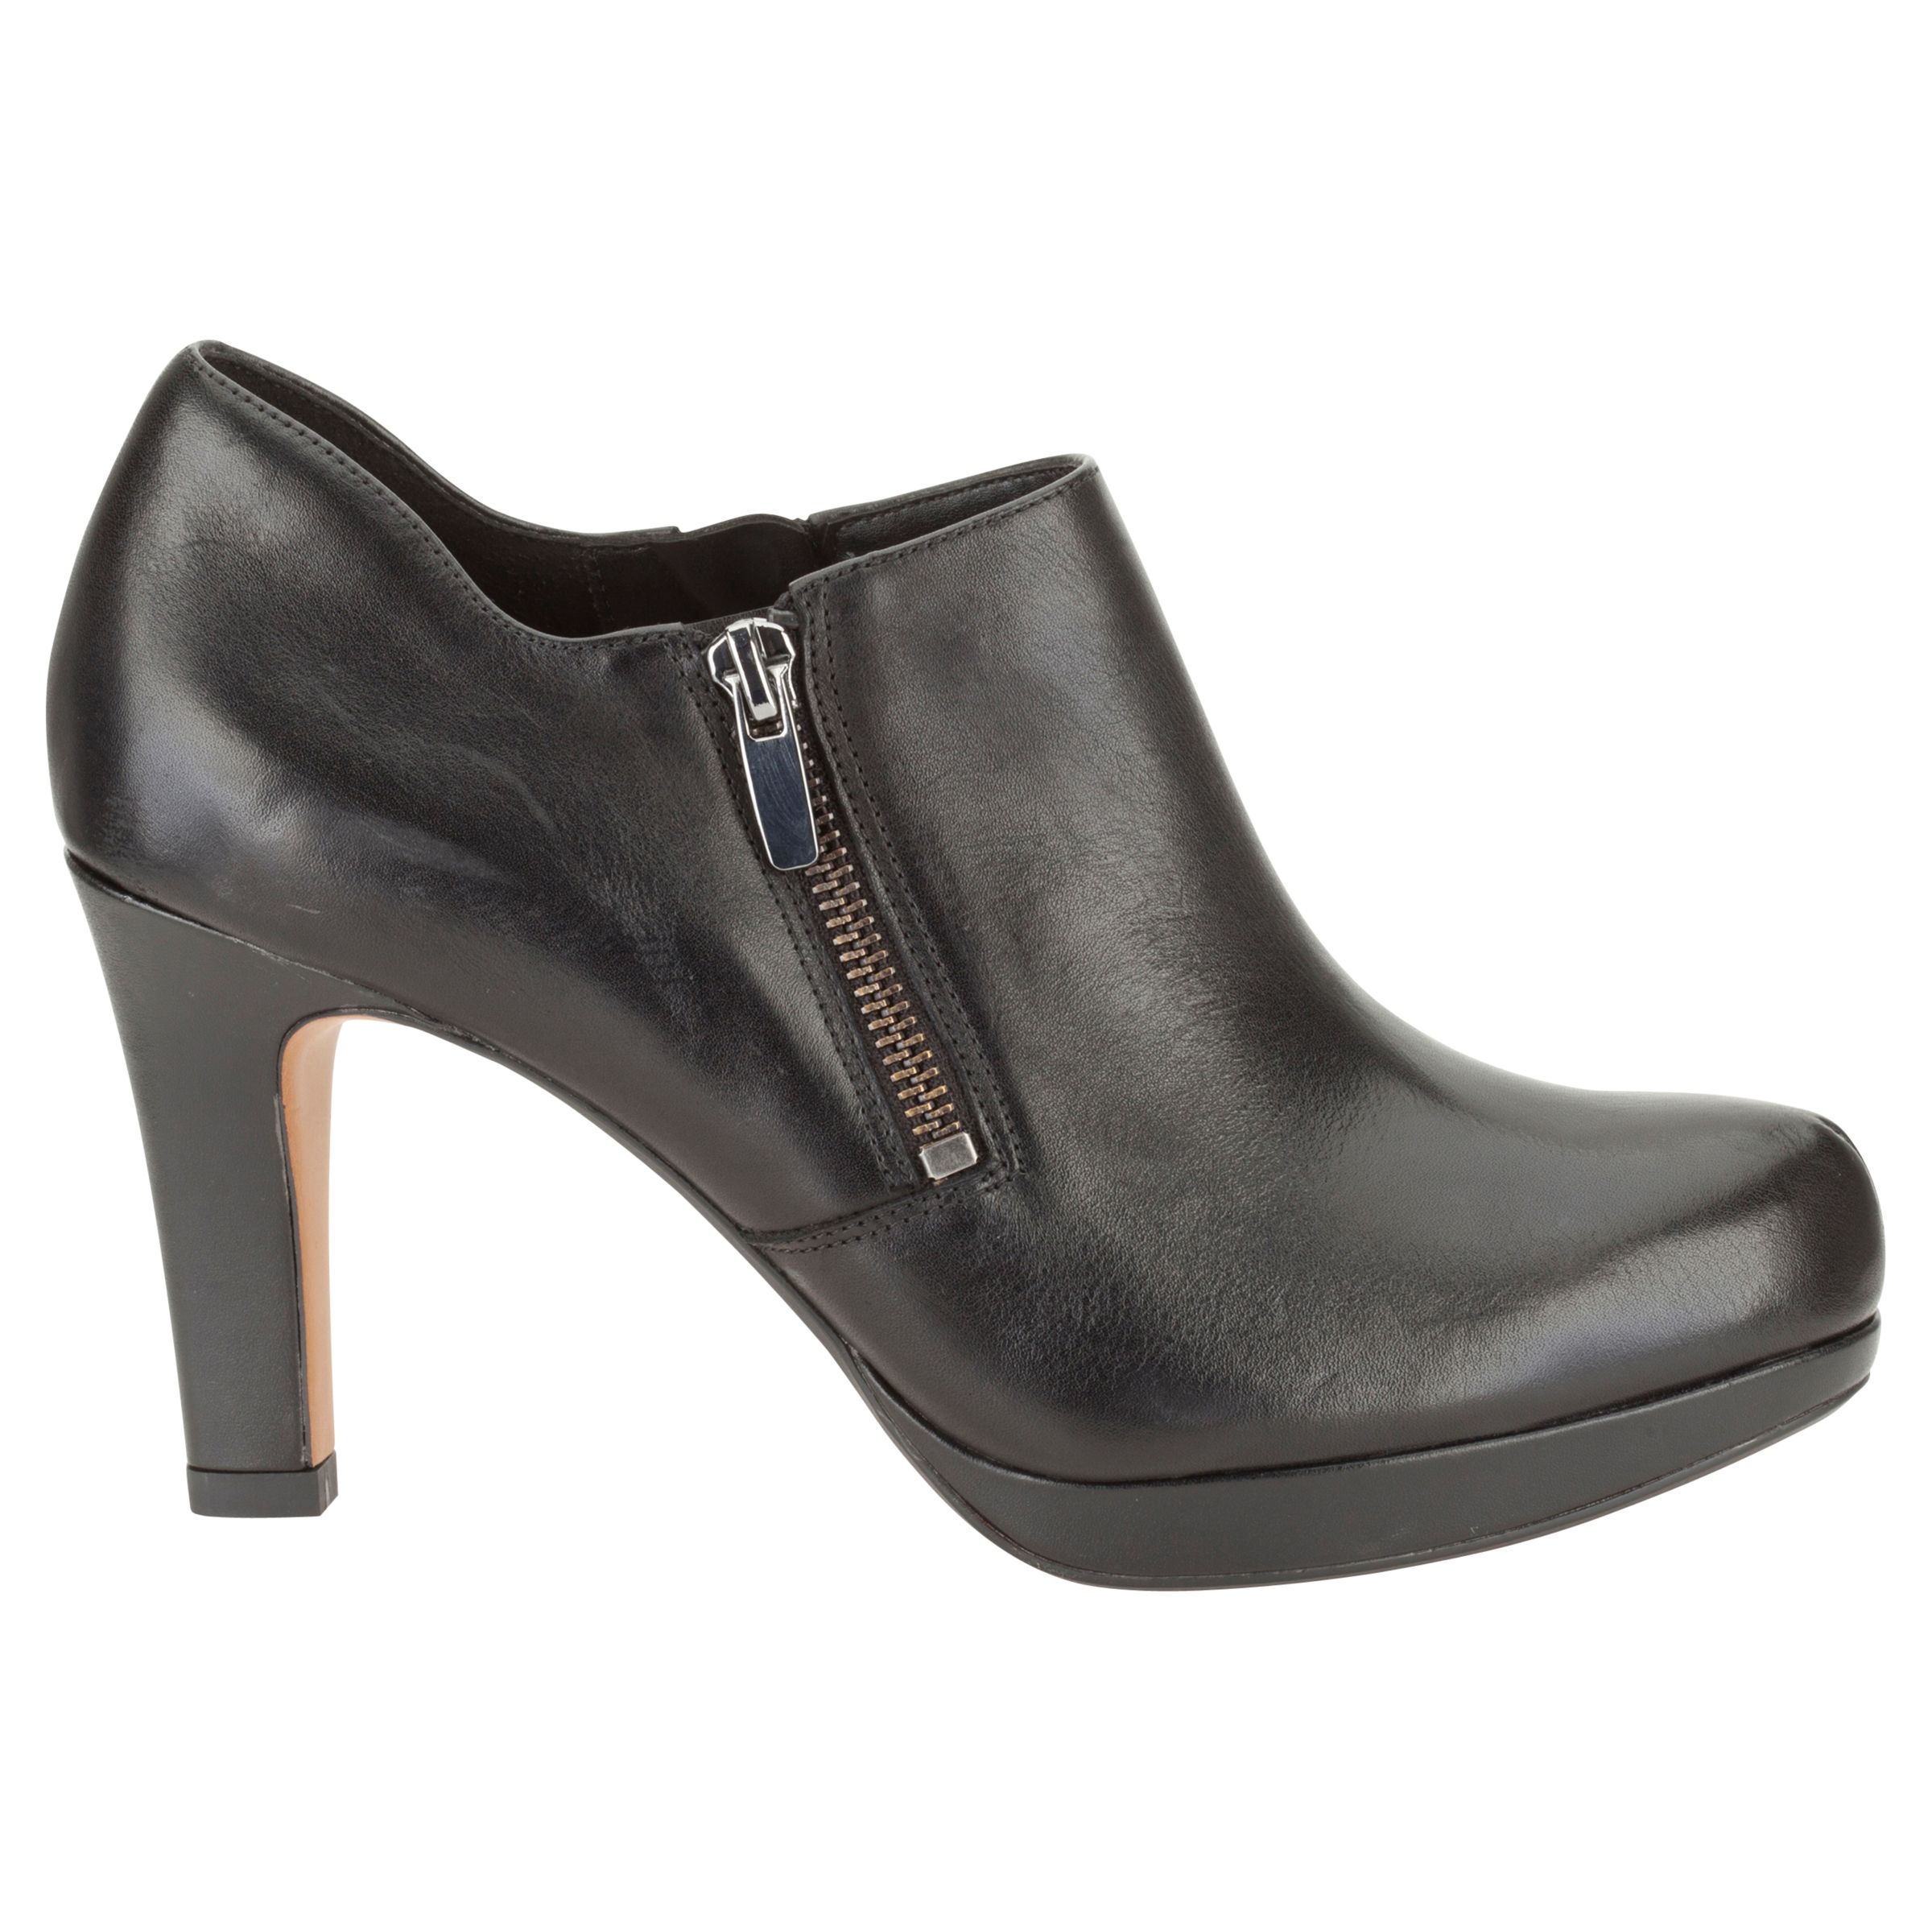 Clarks Amos Kendra Leather Ankle Boots, Black